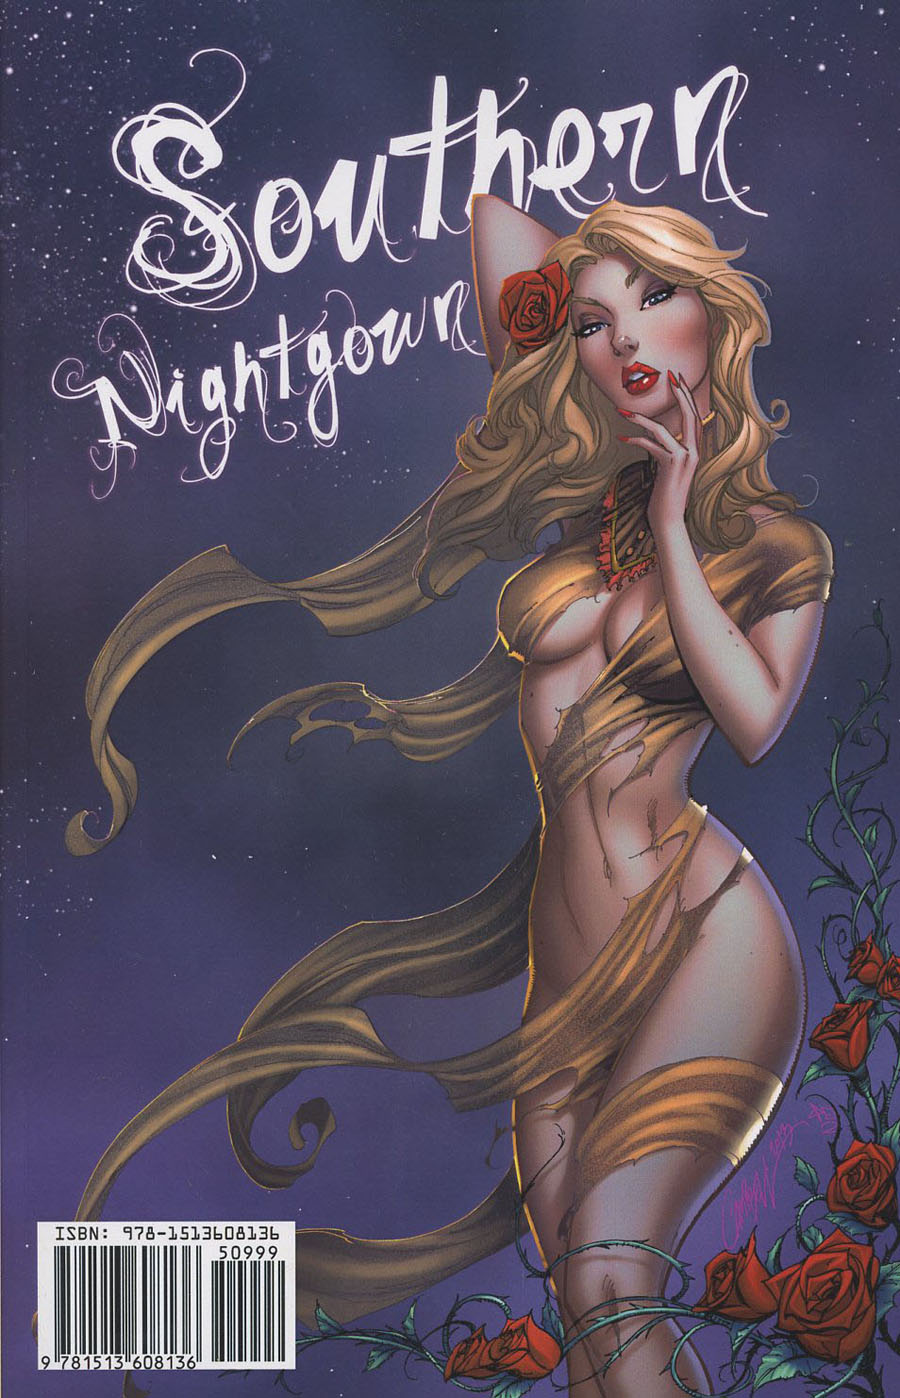 Southern Nightgown Vol 1 TP